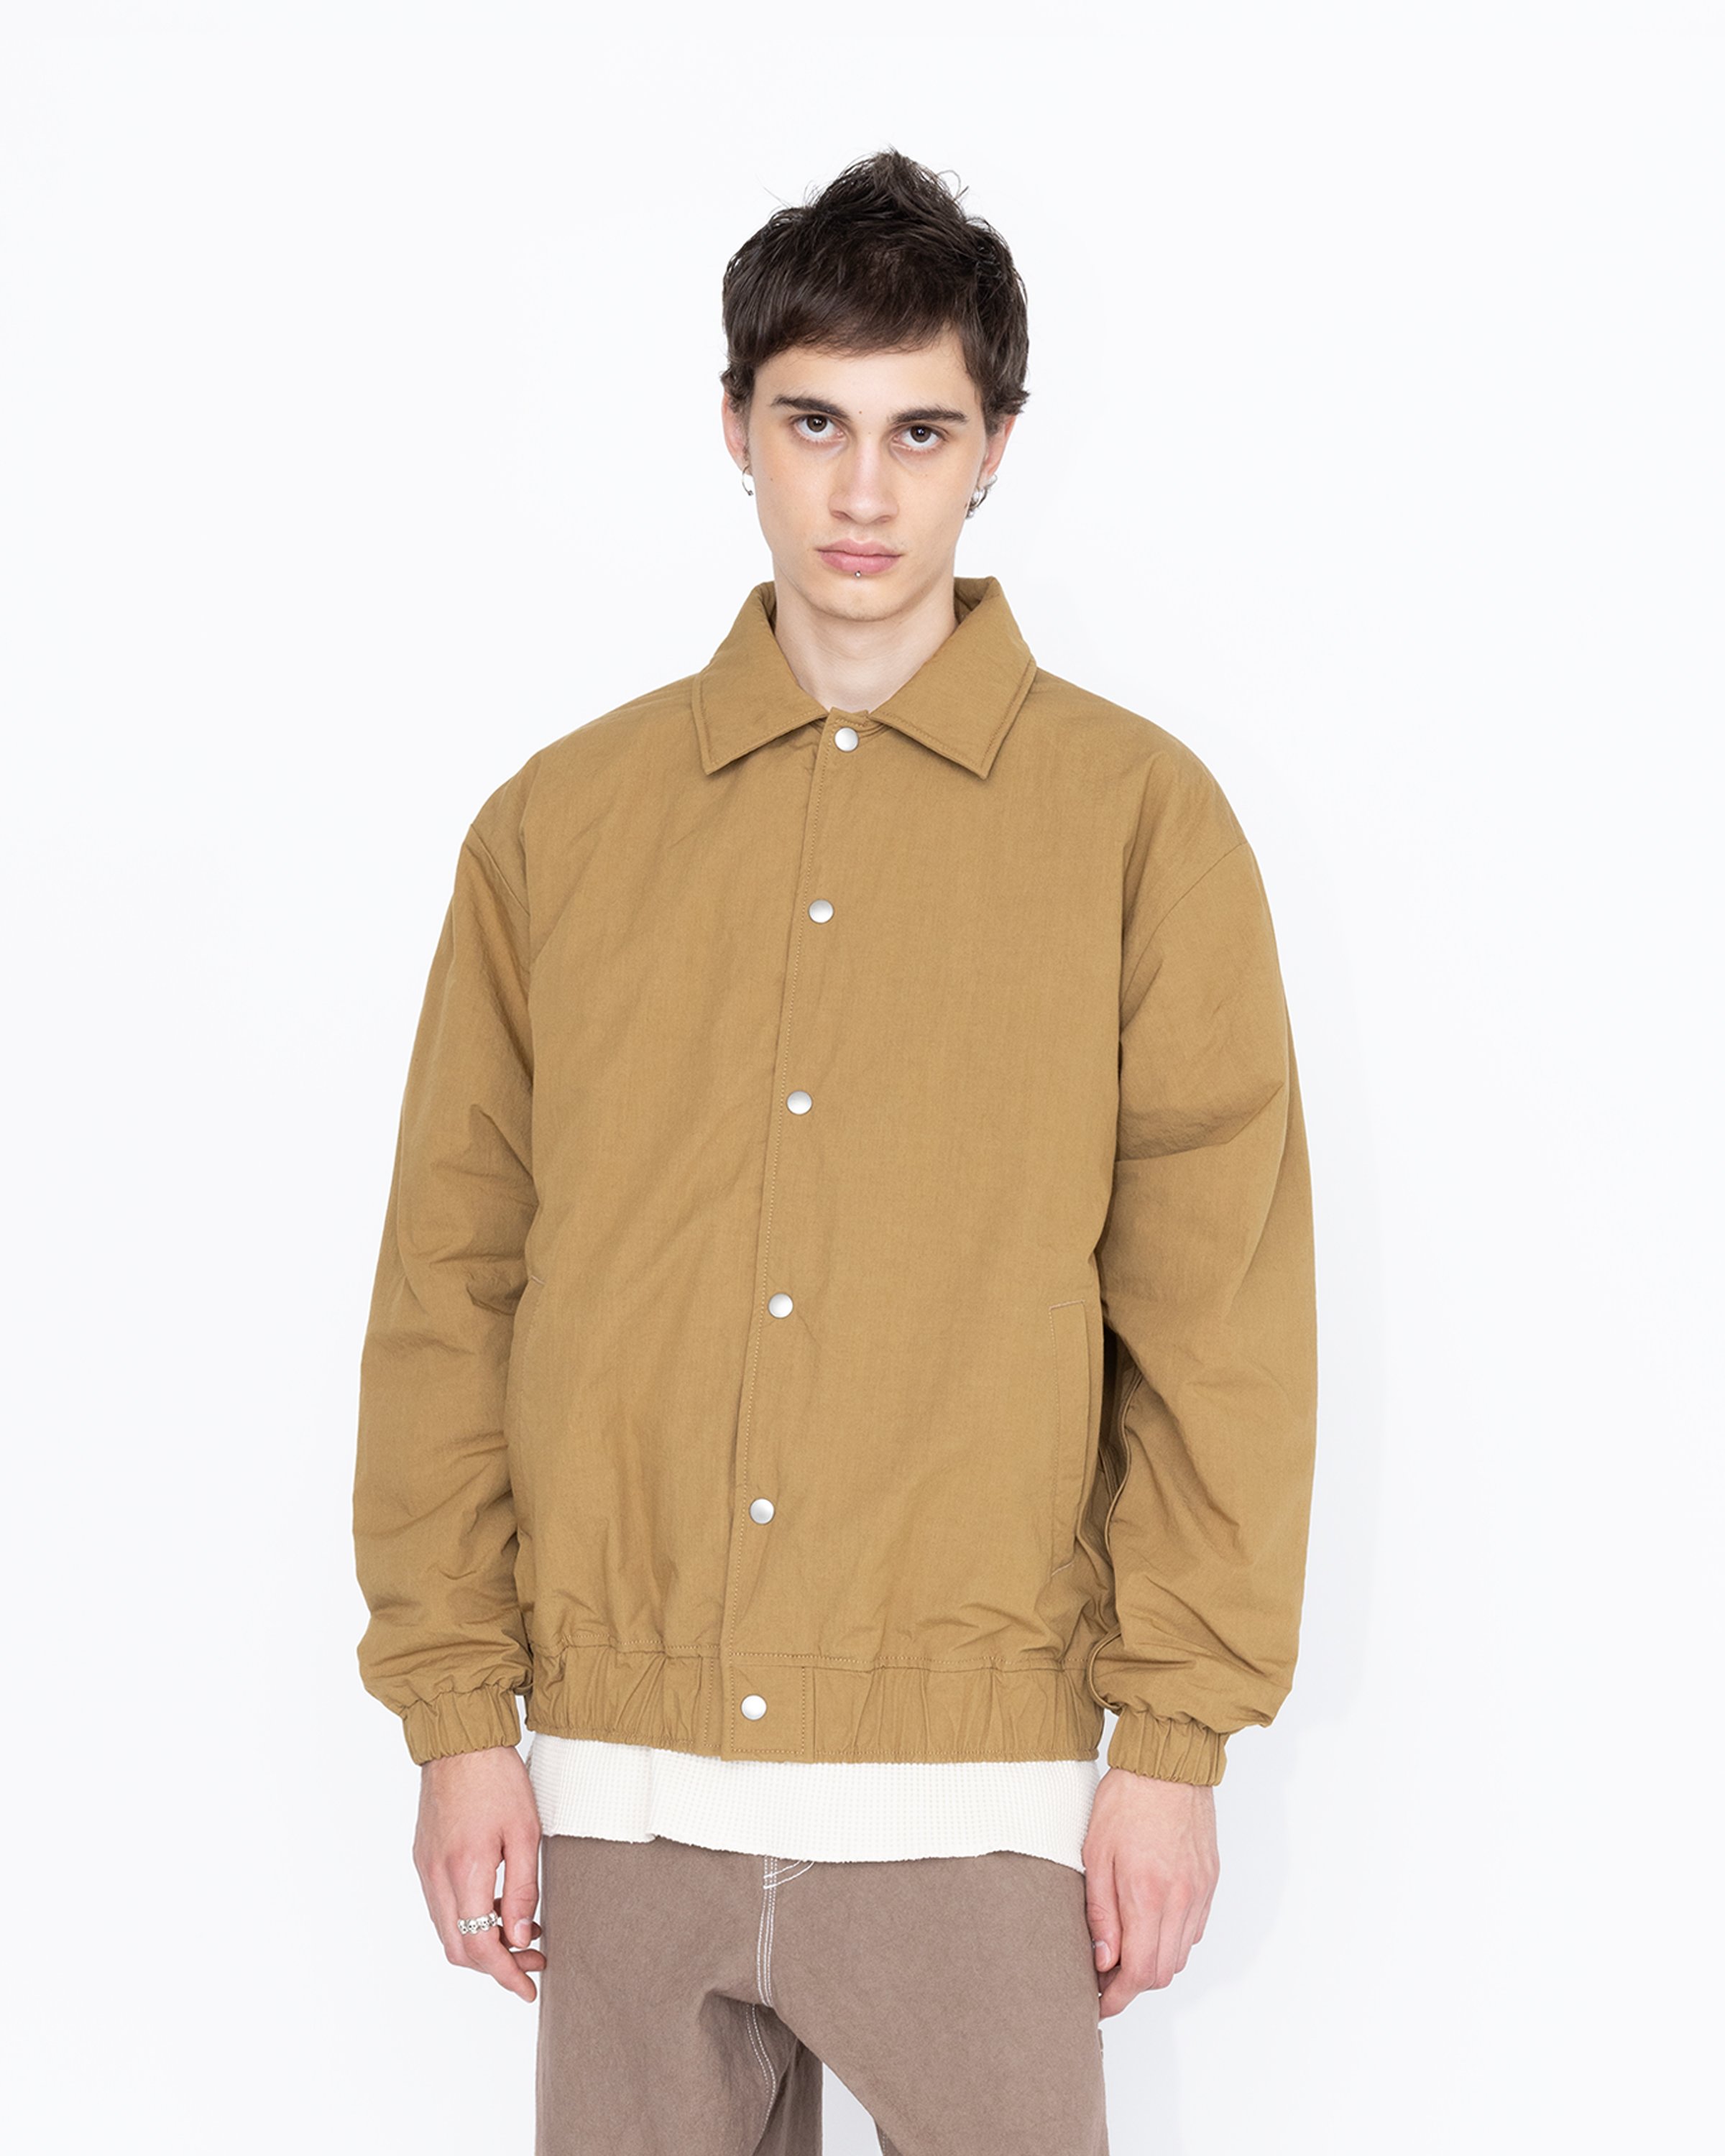 Highsnobiety HS05 - Reverse Piping Insulated Jacket Beige - Clothing - Beige - Image 3